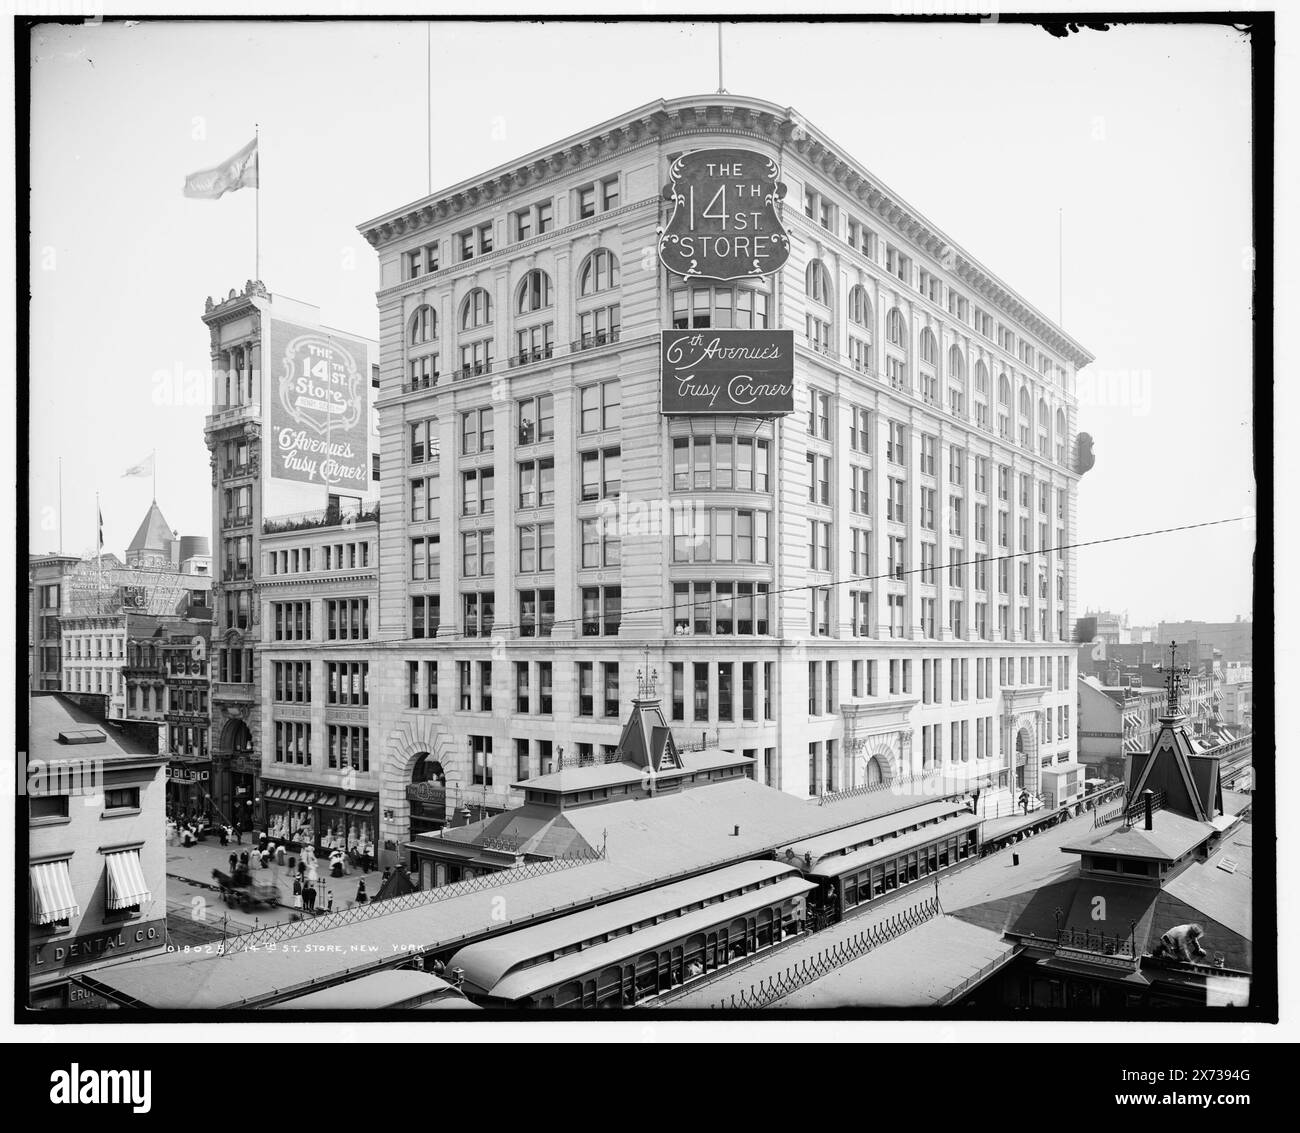 14th St. Store, New York, 'Henry Siegel, Pres.' on building., Date based on Detroit, Catalogue P (1906)., '376' on negative., Detroit Publishing Co. no. 018025., Gift; State Historical Society of Colorado; 1949,  Department stores. , Elevated railroads. , United States, New York (State), New York. Stock Photo